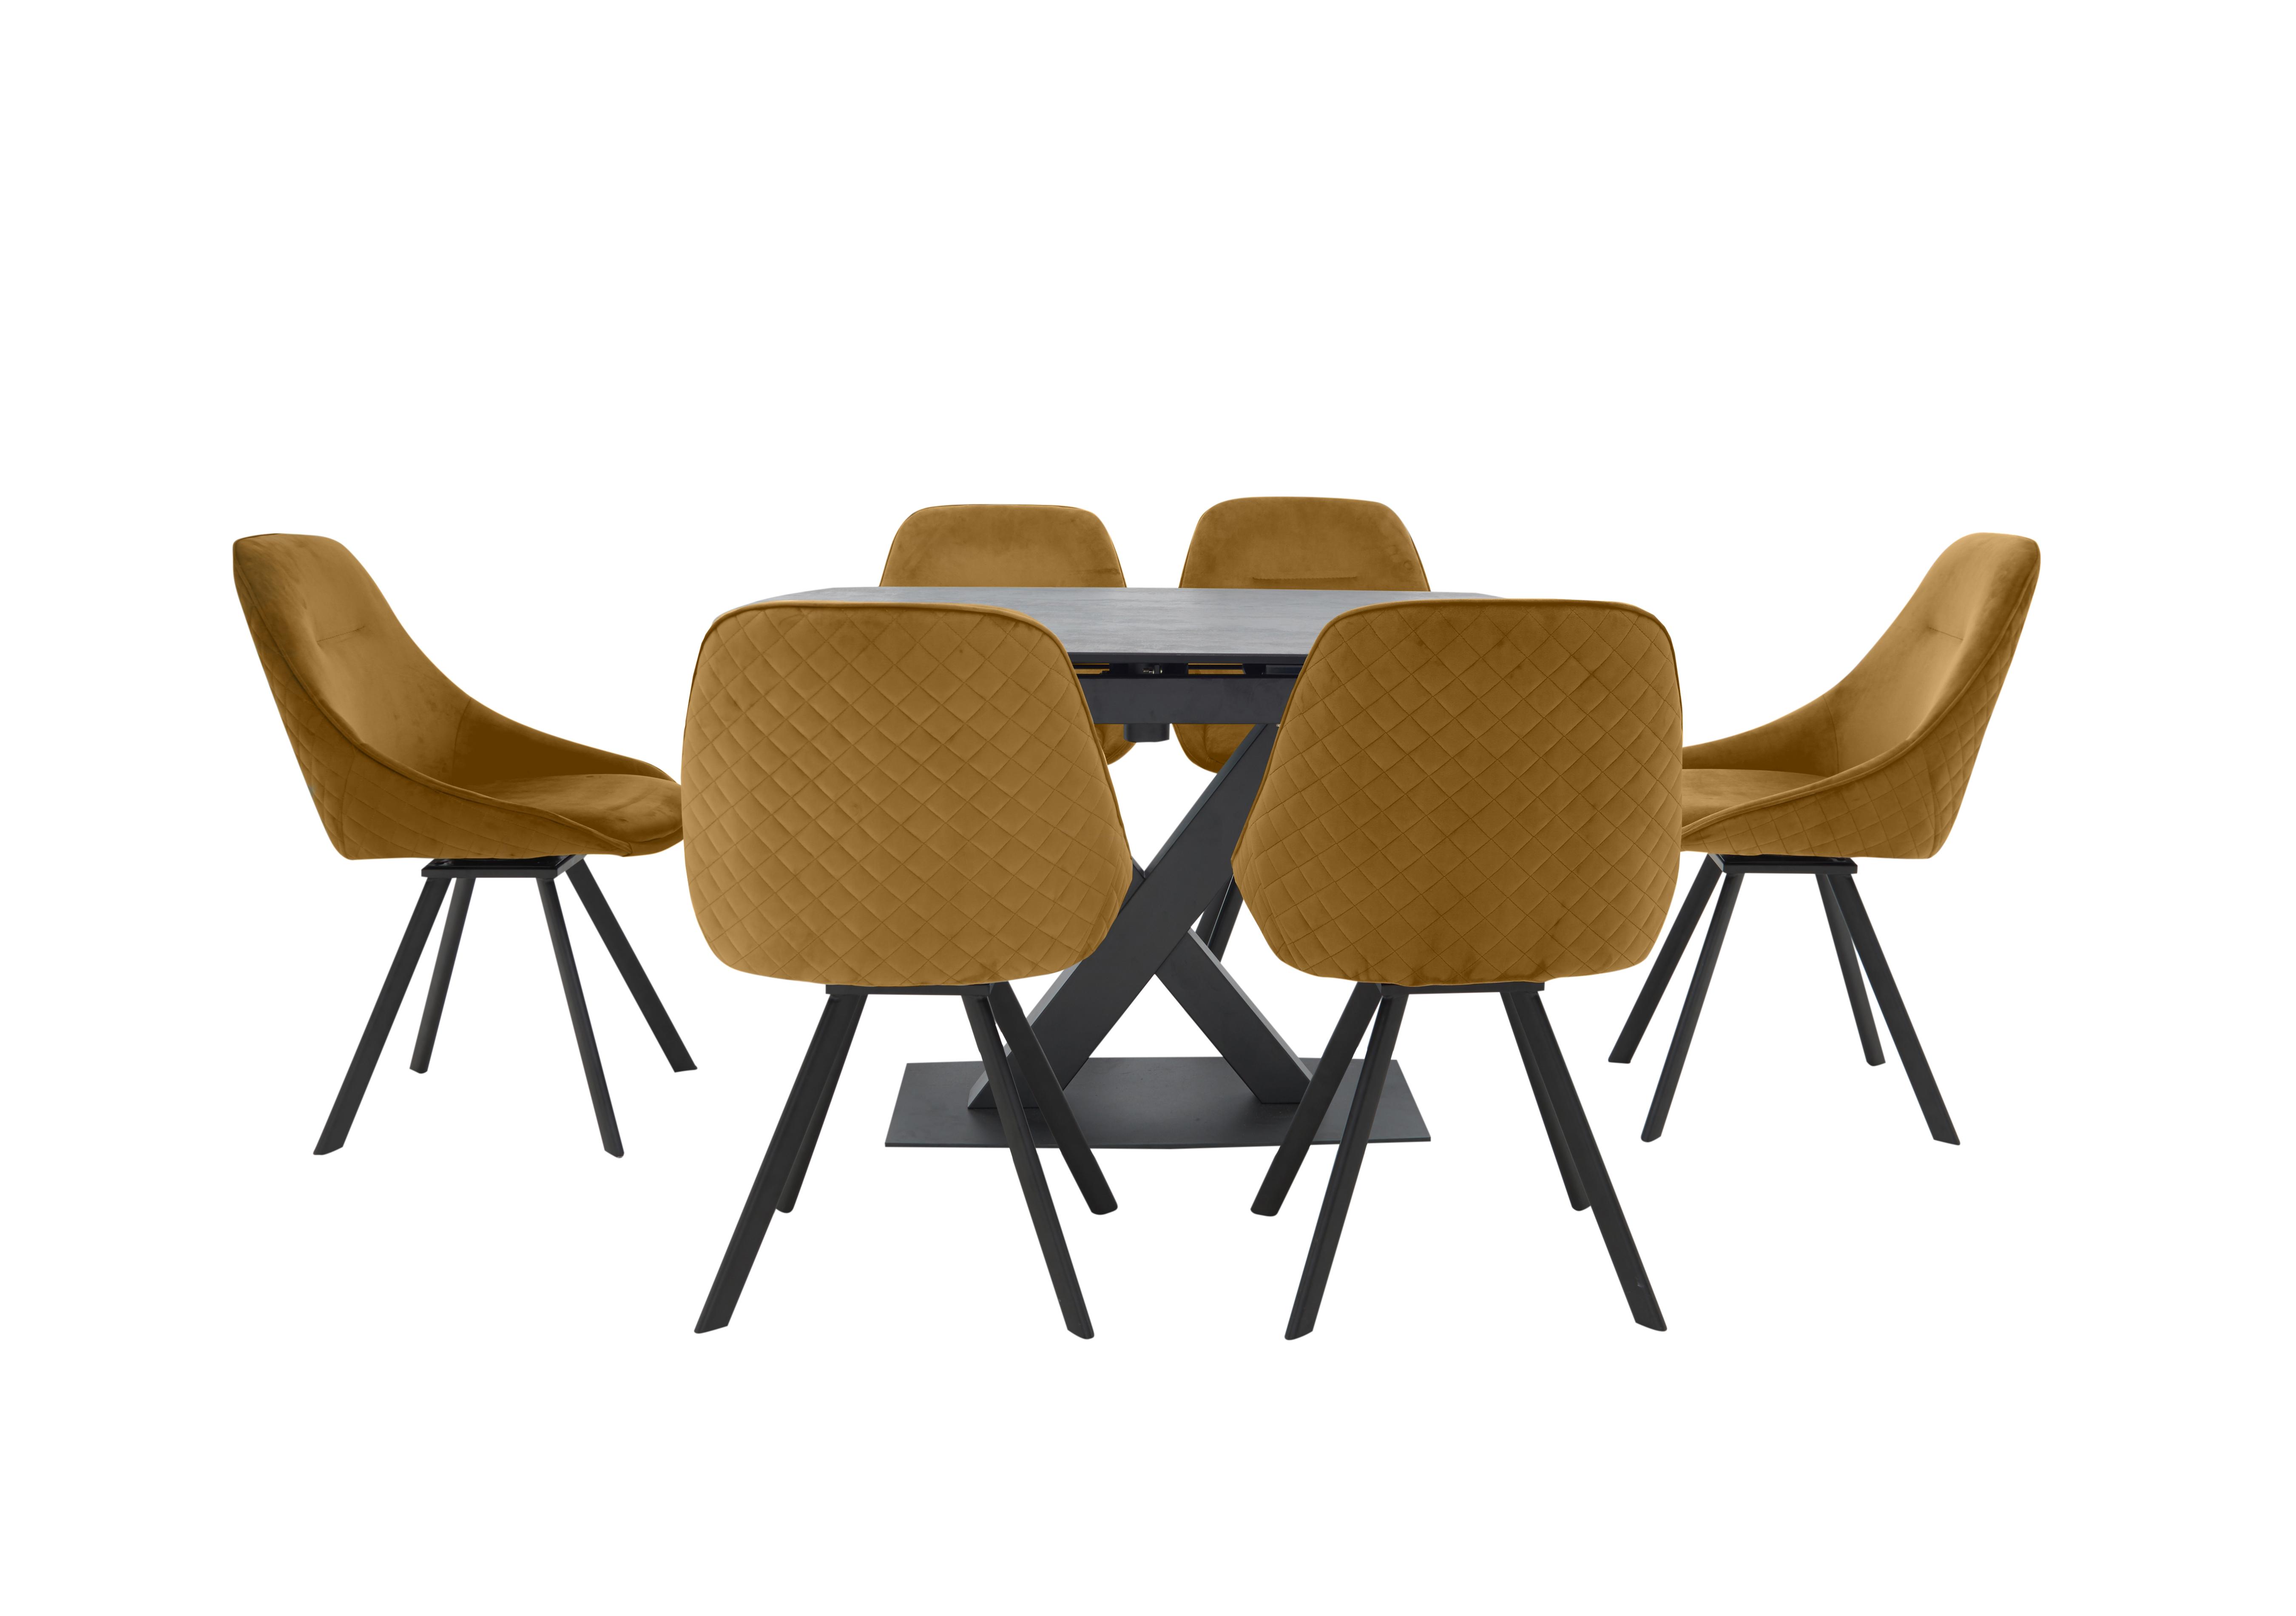 Arctic Extending Dining Table with Graphite Top and 6 Swivel Chairs in Mustard Velvet Chairs on Furniture Village